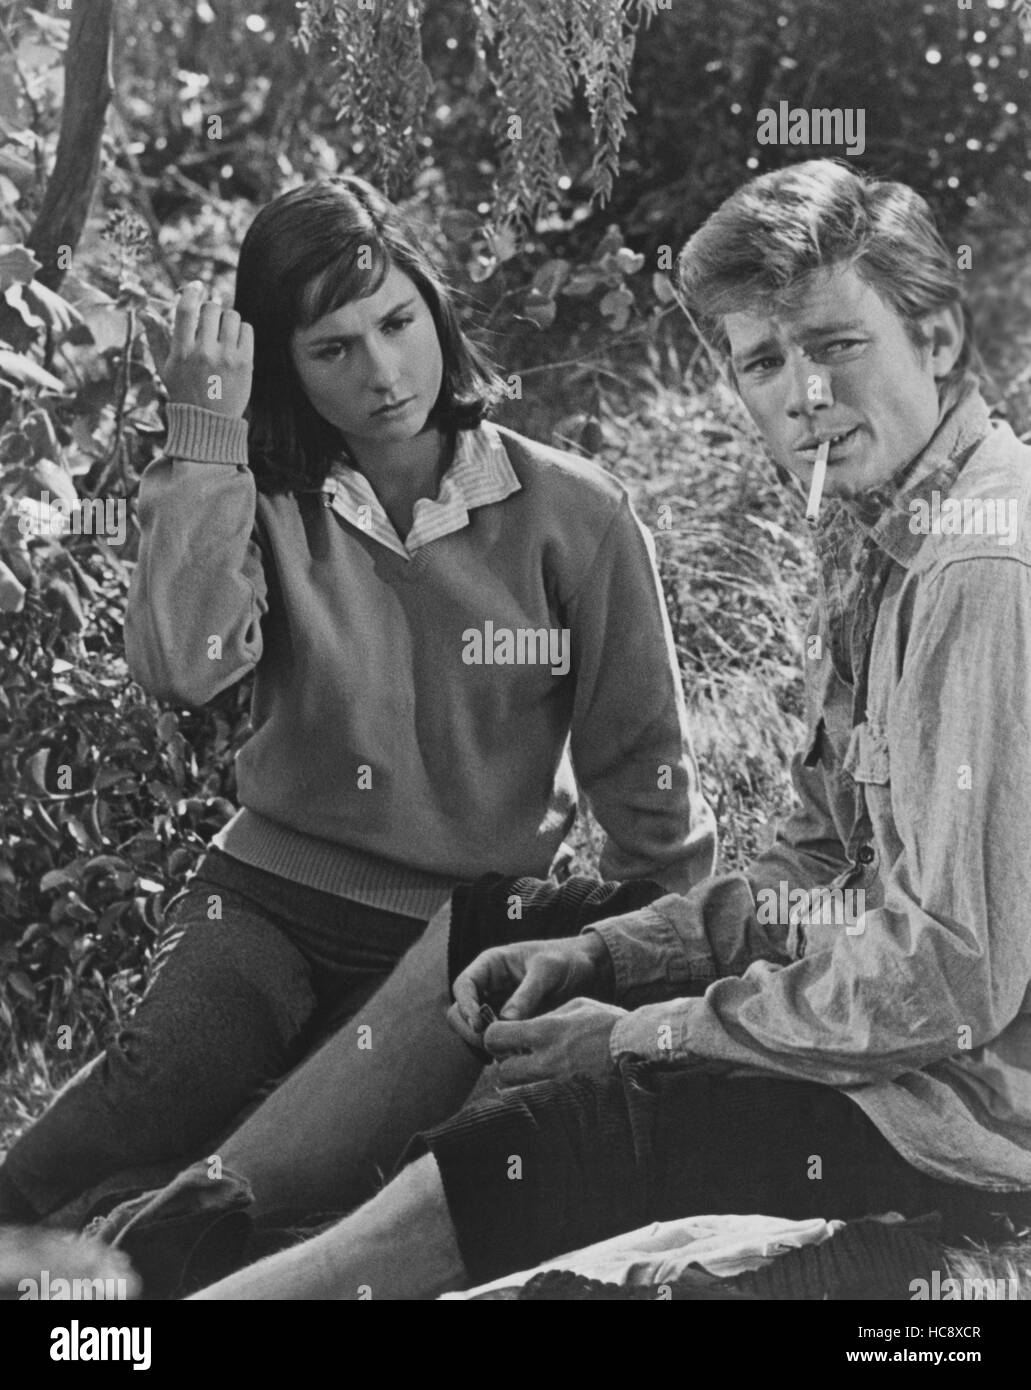 WILD SEED, from left: Celia Kaye, Michael Parks, 1965 Stock Photo - Alamy